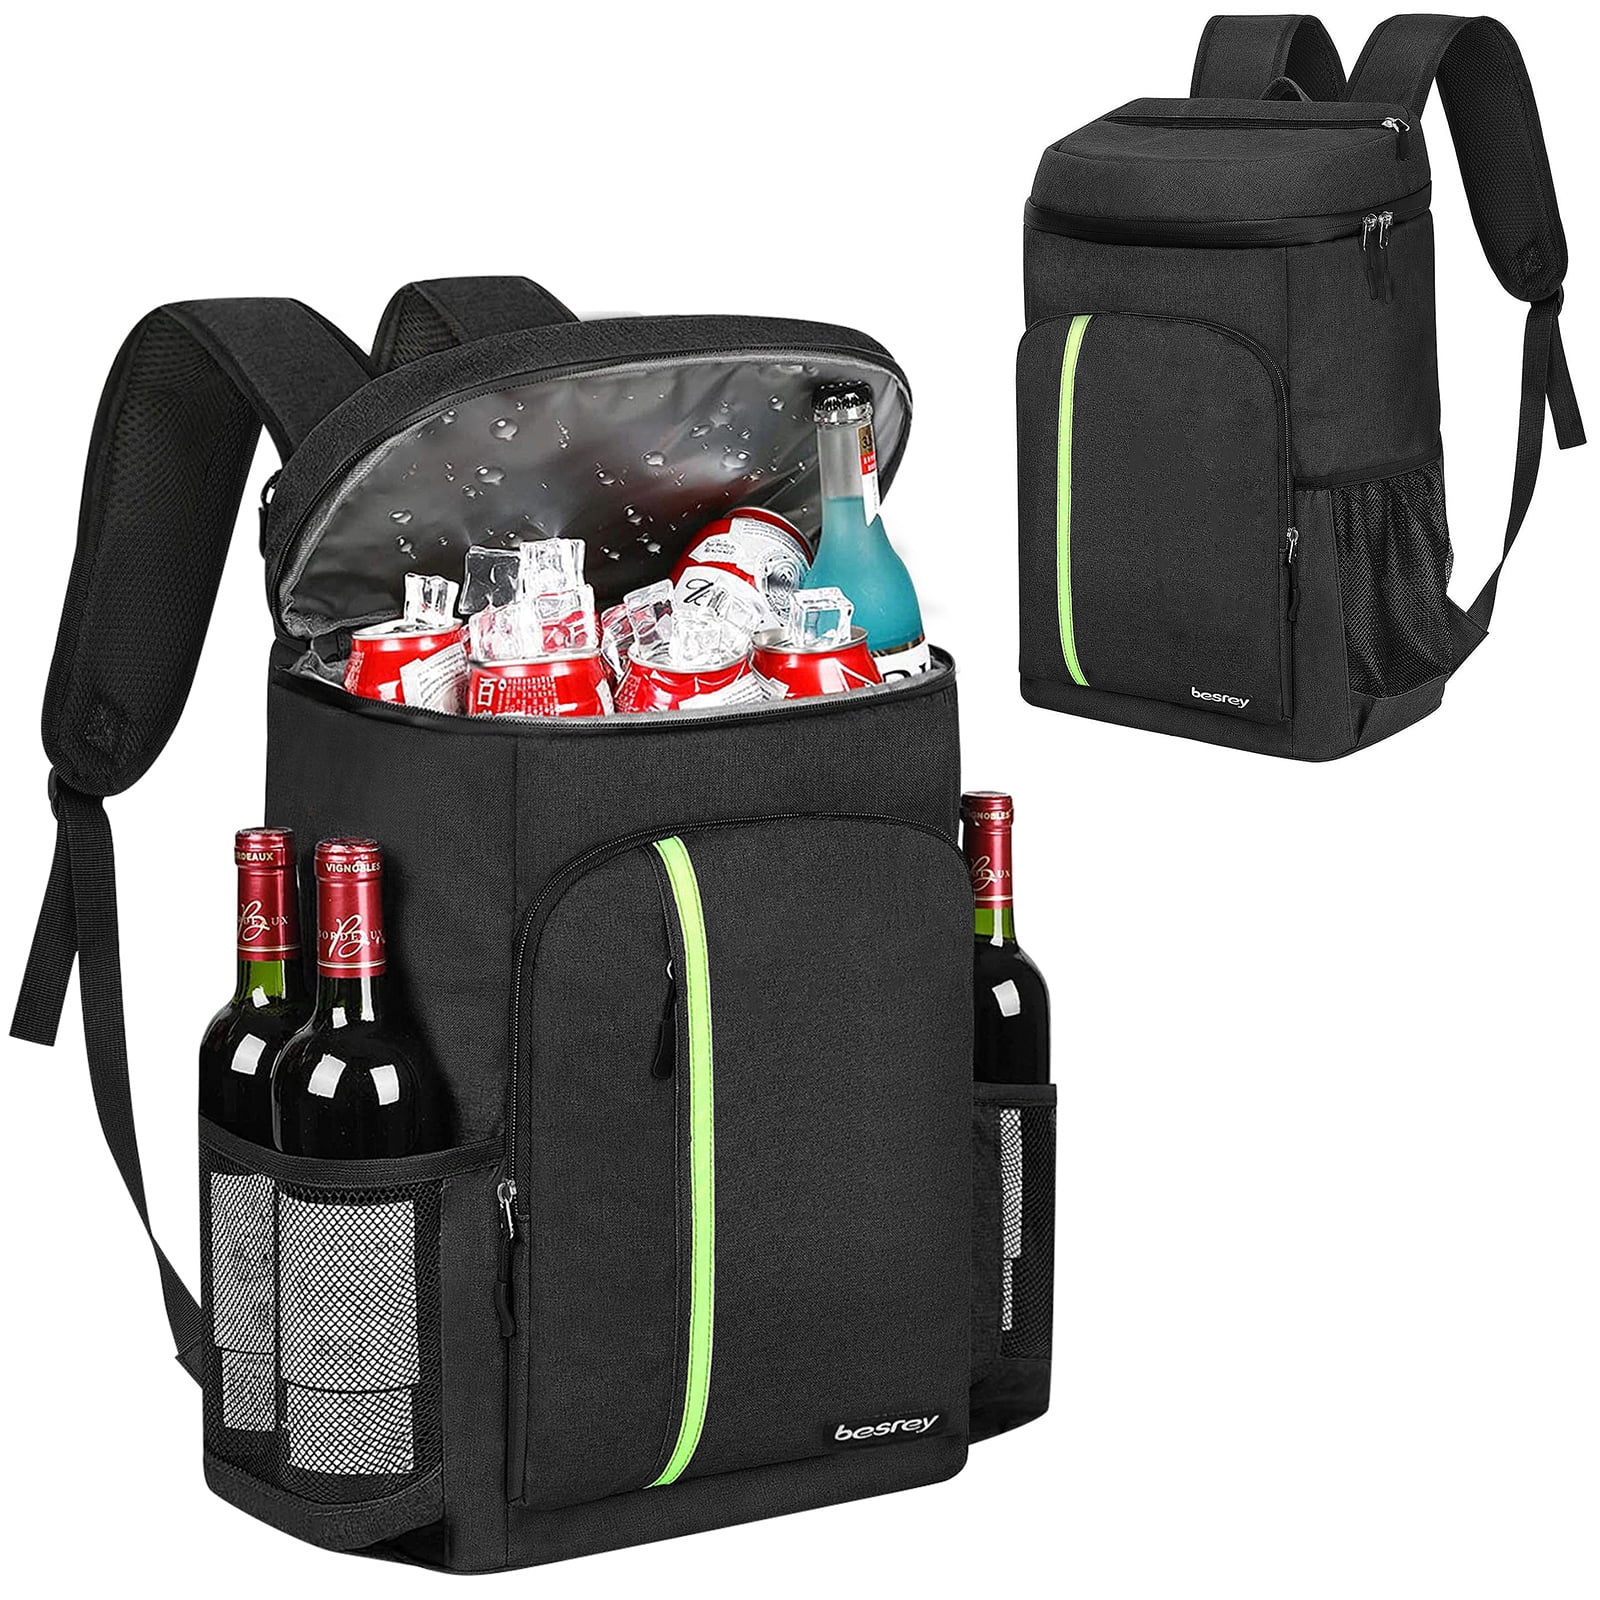 Premium Backpack Insulated Cooler 12 Can Ice Camping Picnic Bag Igloo Box Chest 